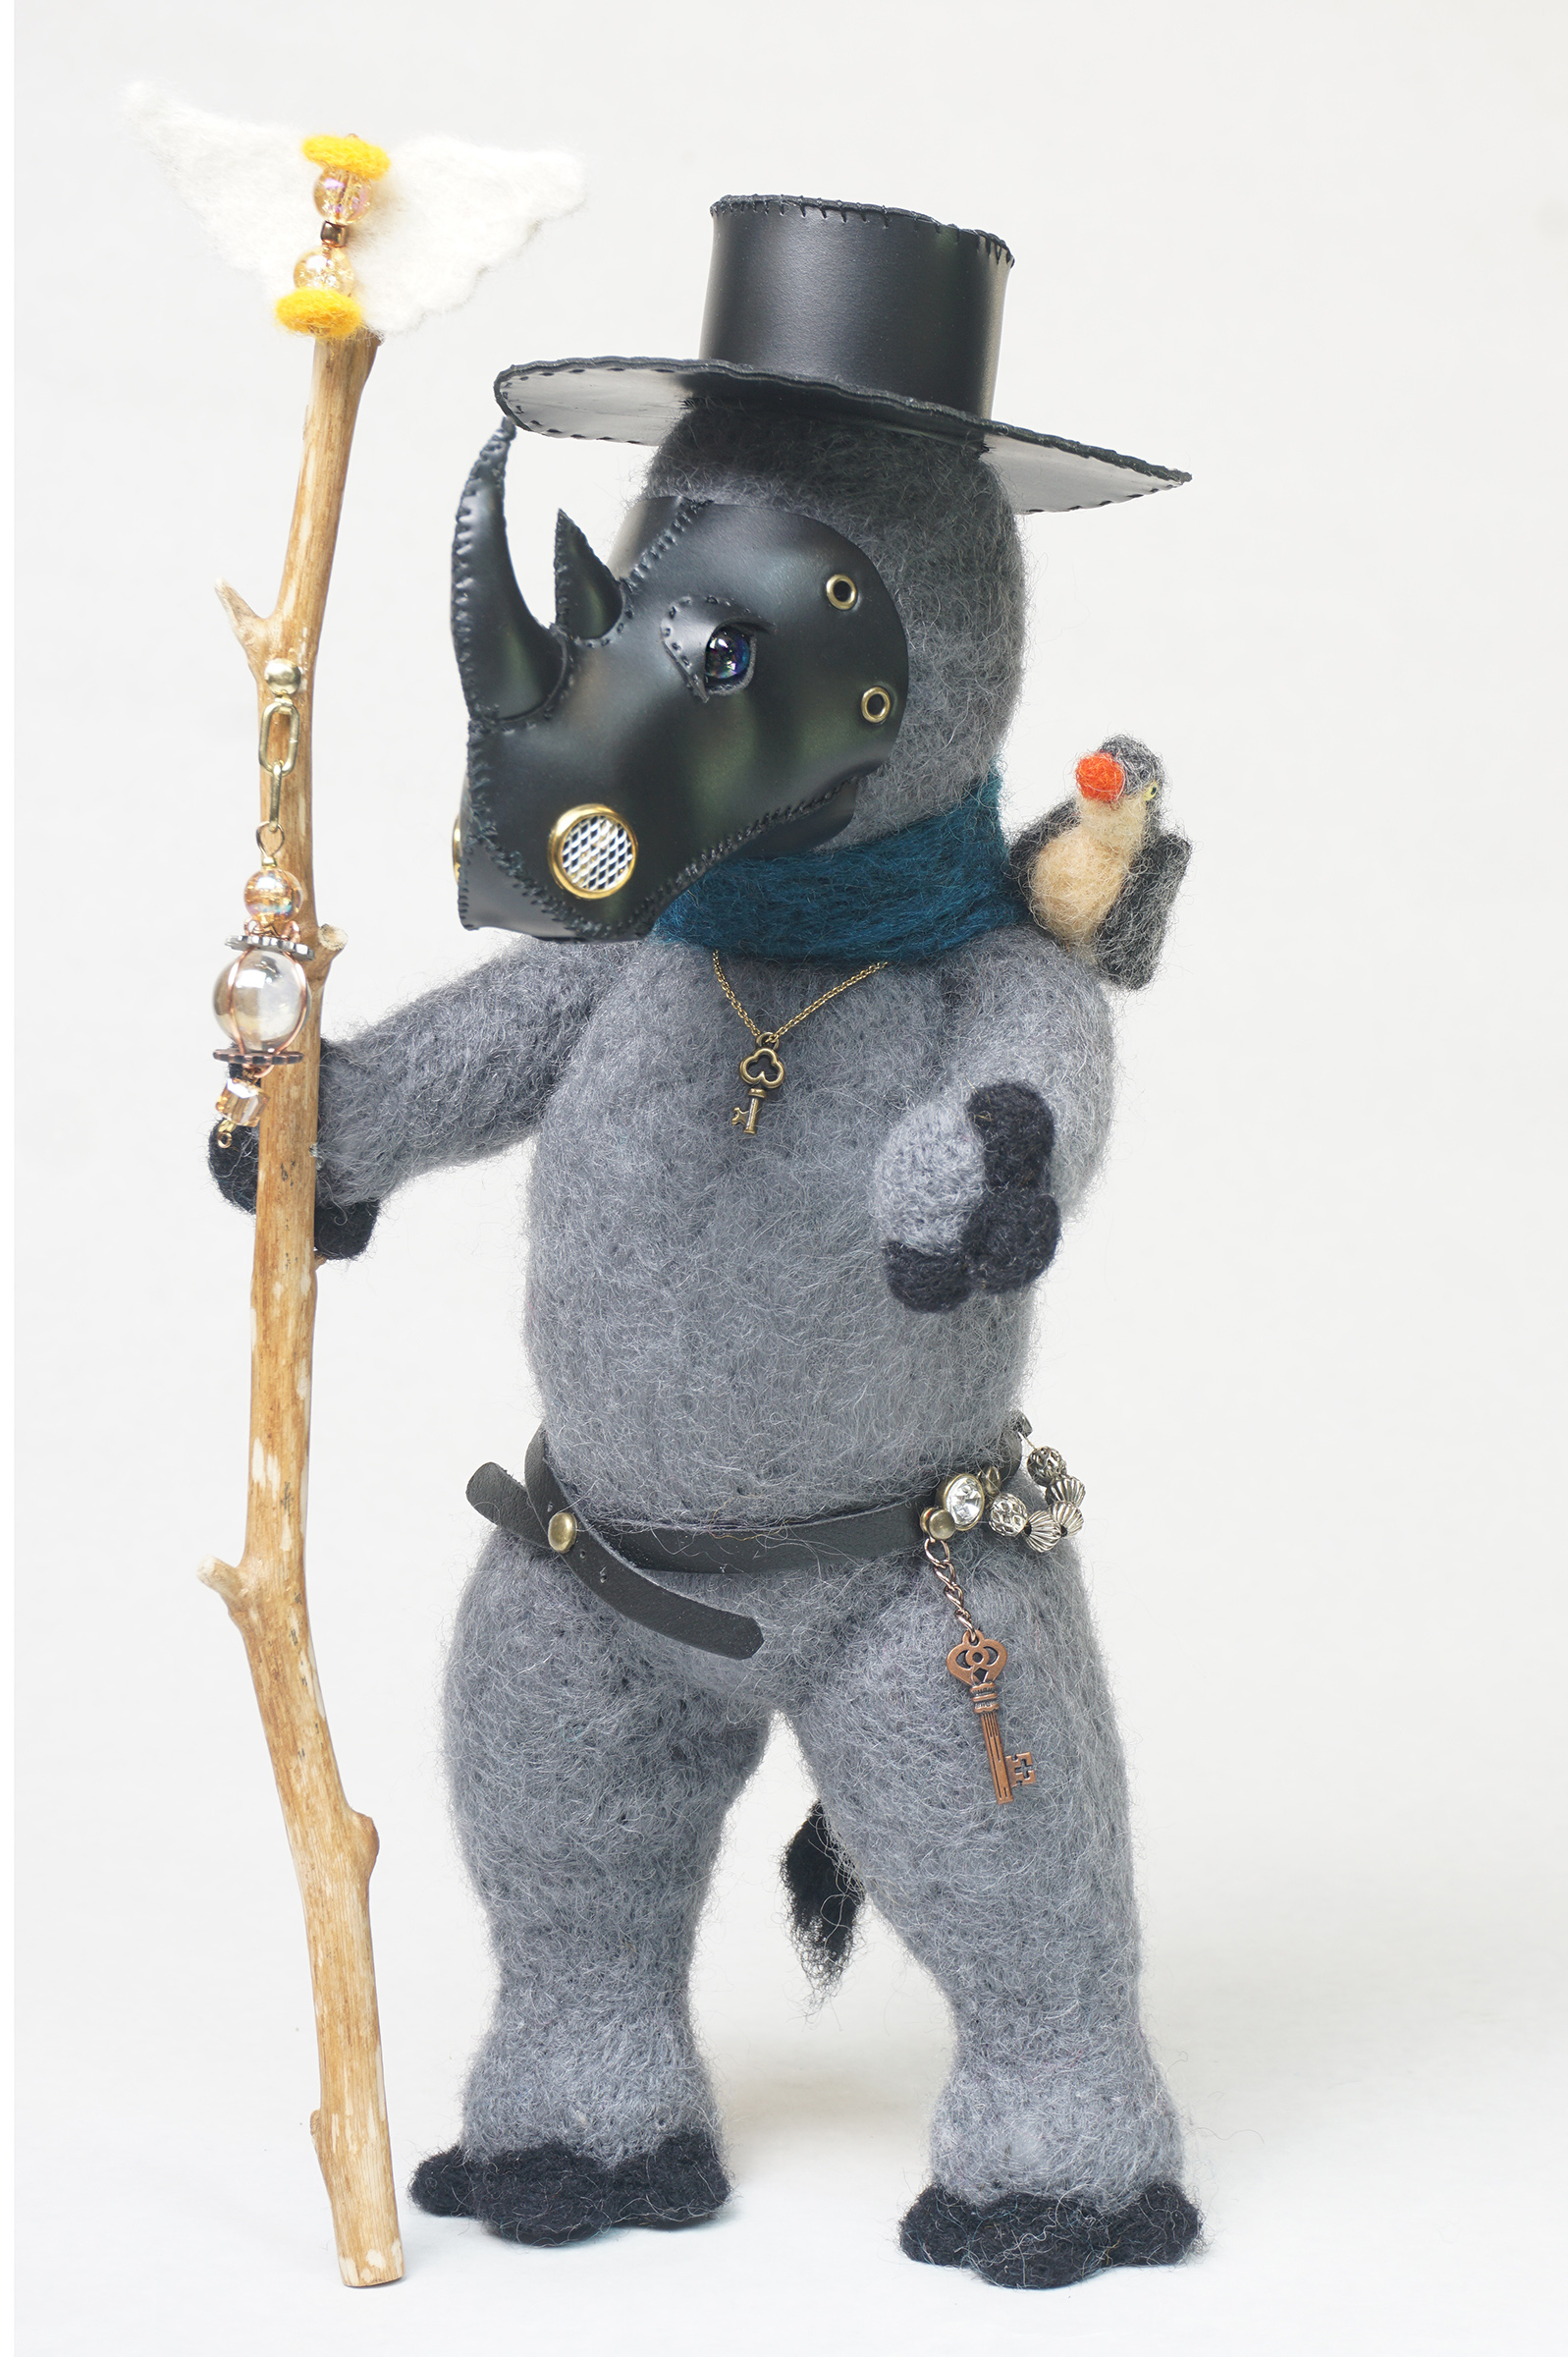 Plague Doctor - anthropomorphic rhinoceros sculpture w/plague mask, staff, and oxpecker assistant. needle felted